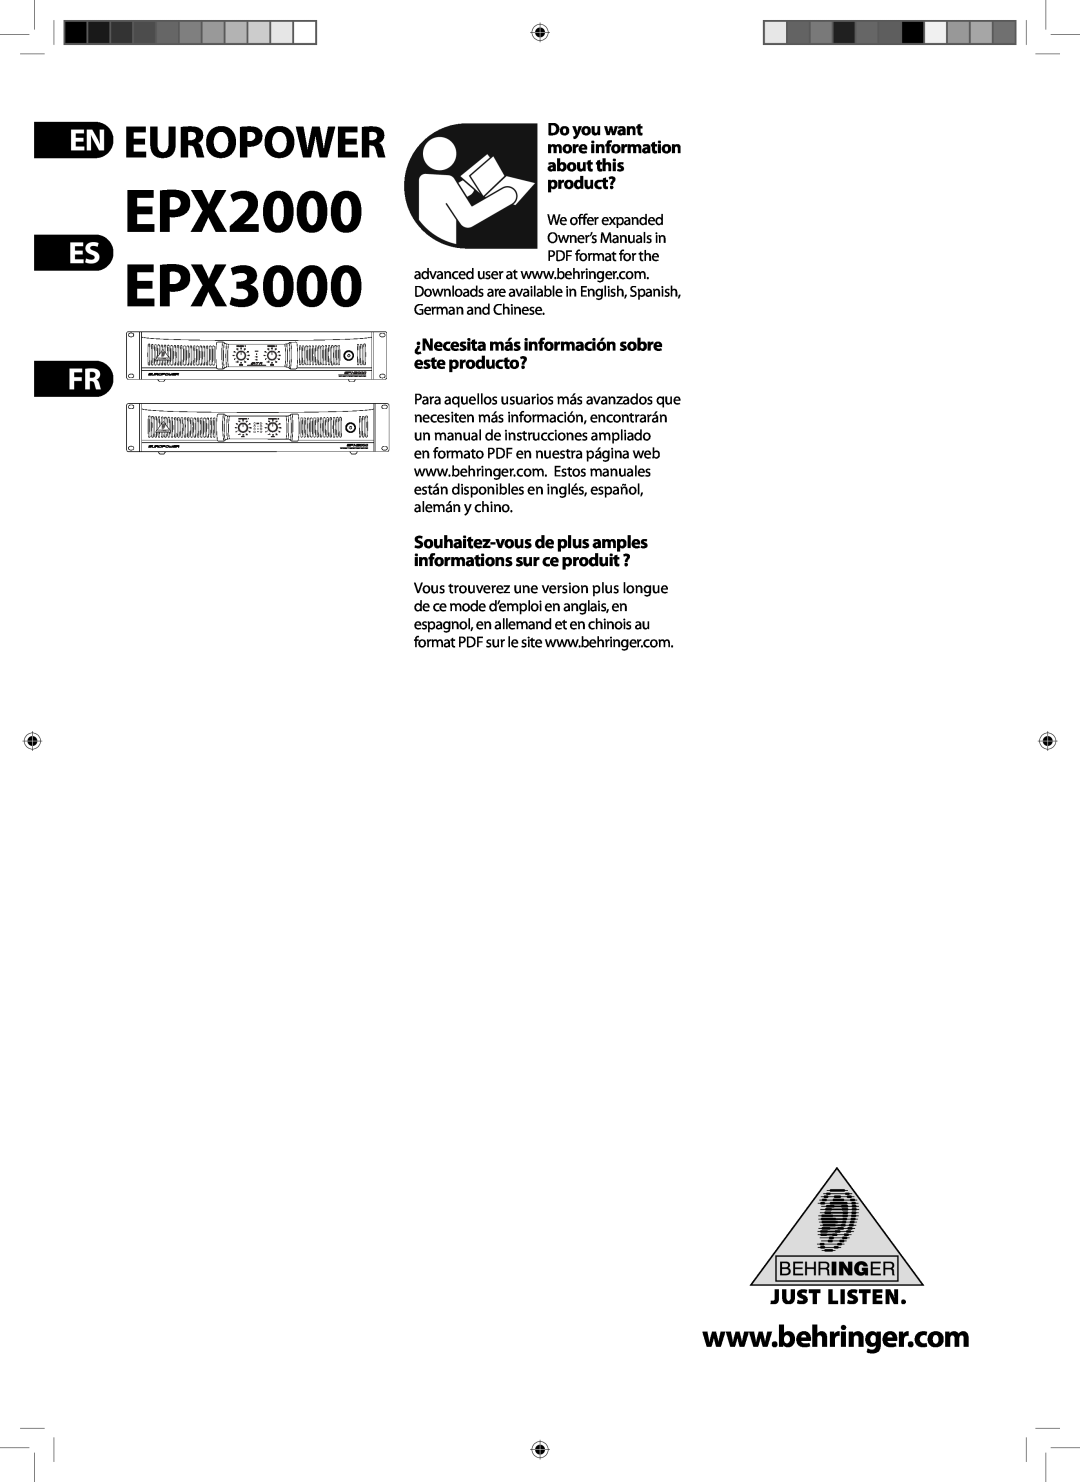 Behringer manual Do you want more information about this product?, EPX2000 ES EPX3000, En Europower 